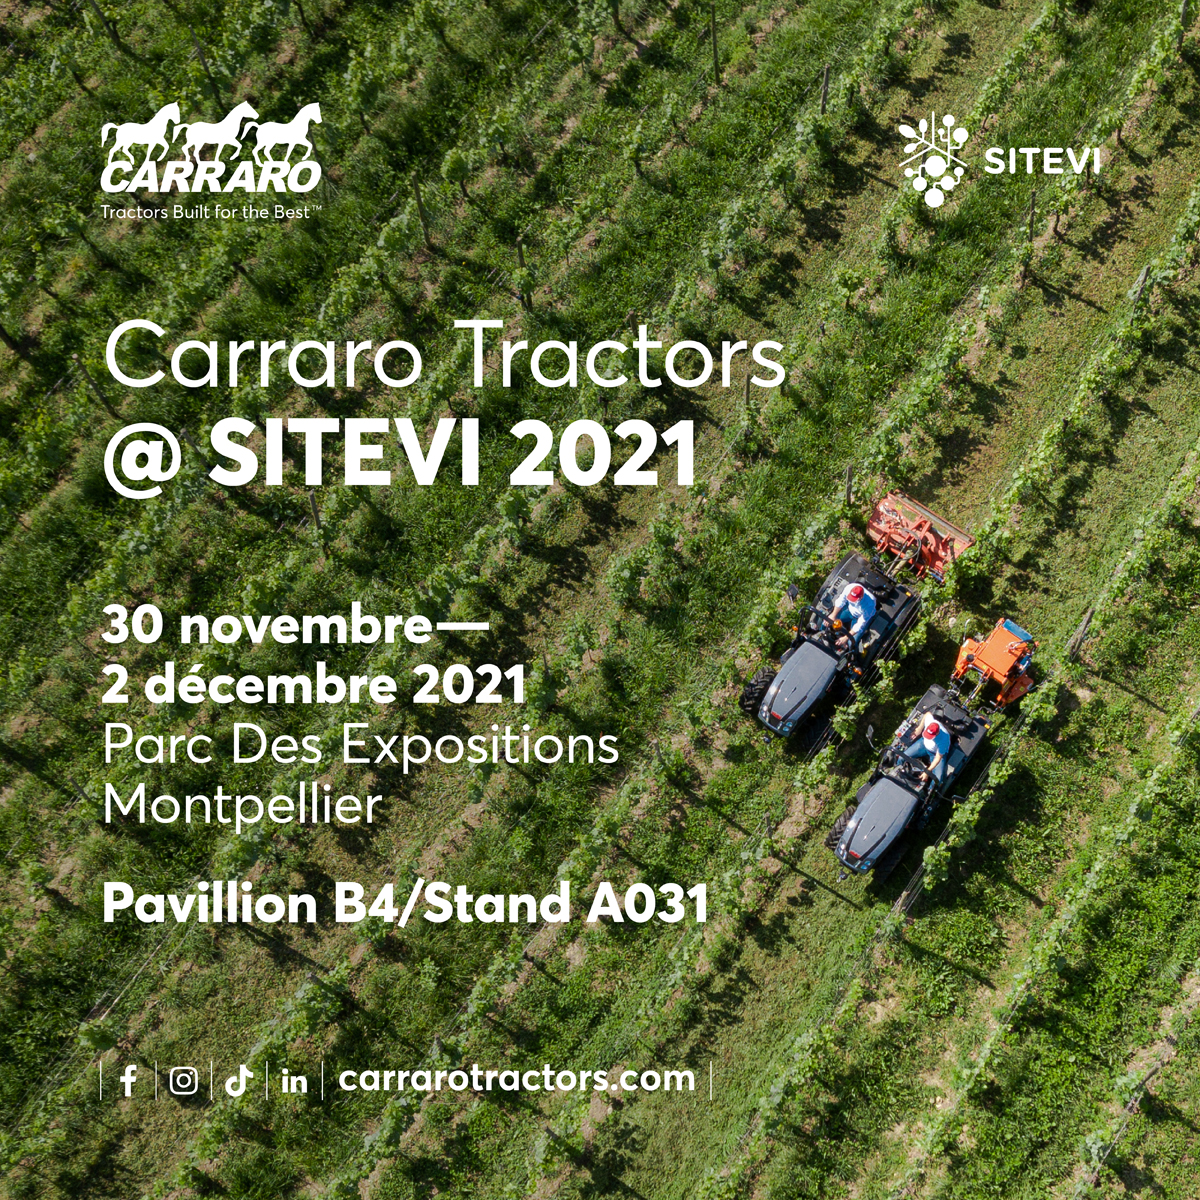 Carraro Tractors: the specialists' brand will be at Sitevi 2021